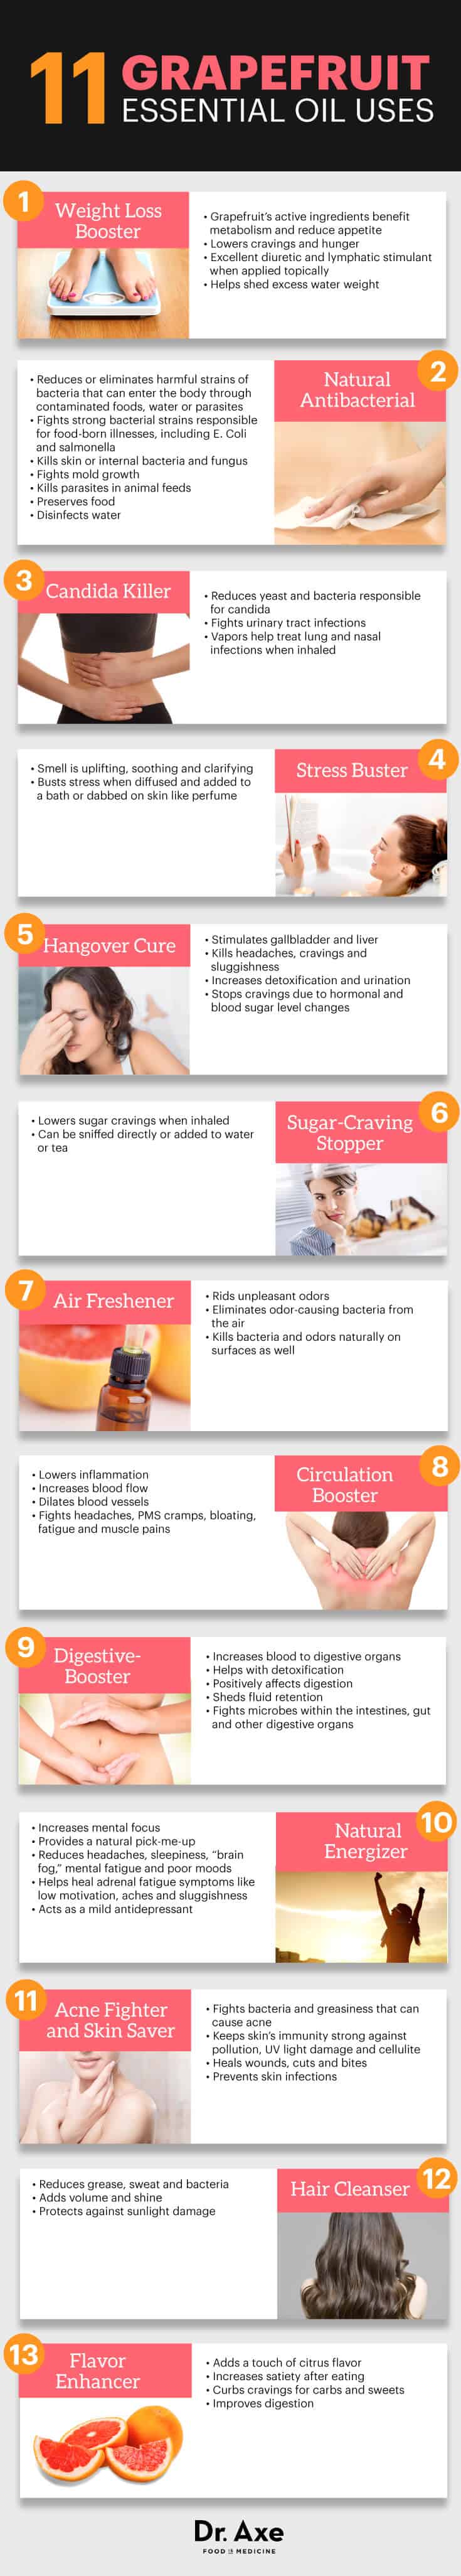 13 Grapefruit Essential Oil Benefits — Starting with ...